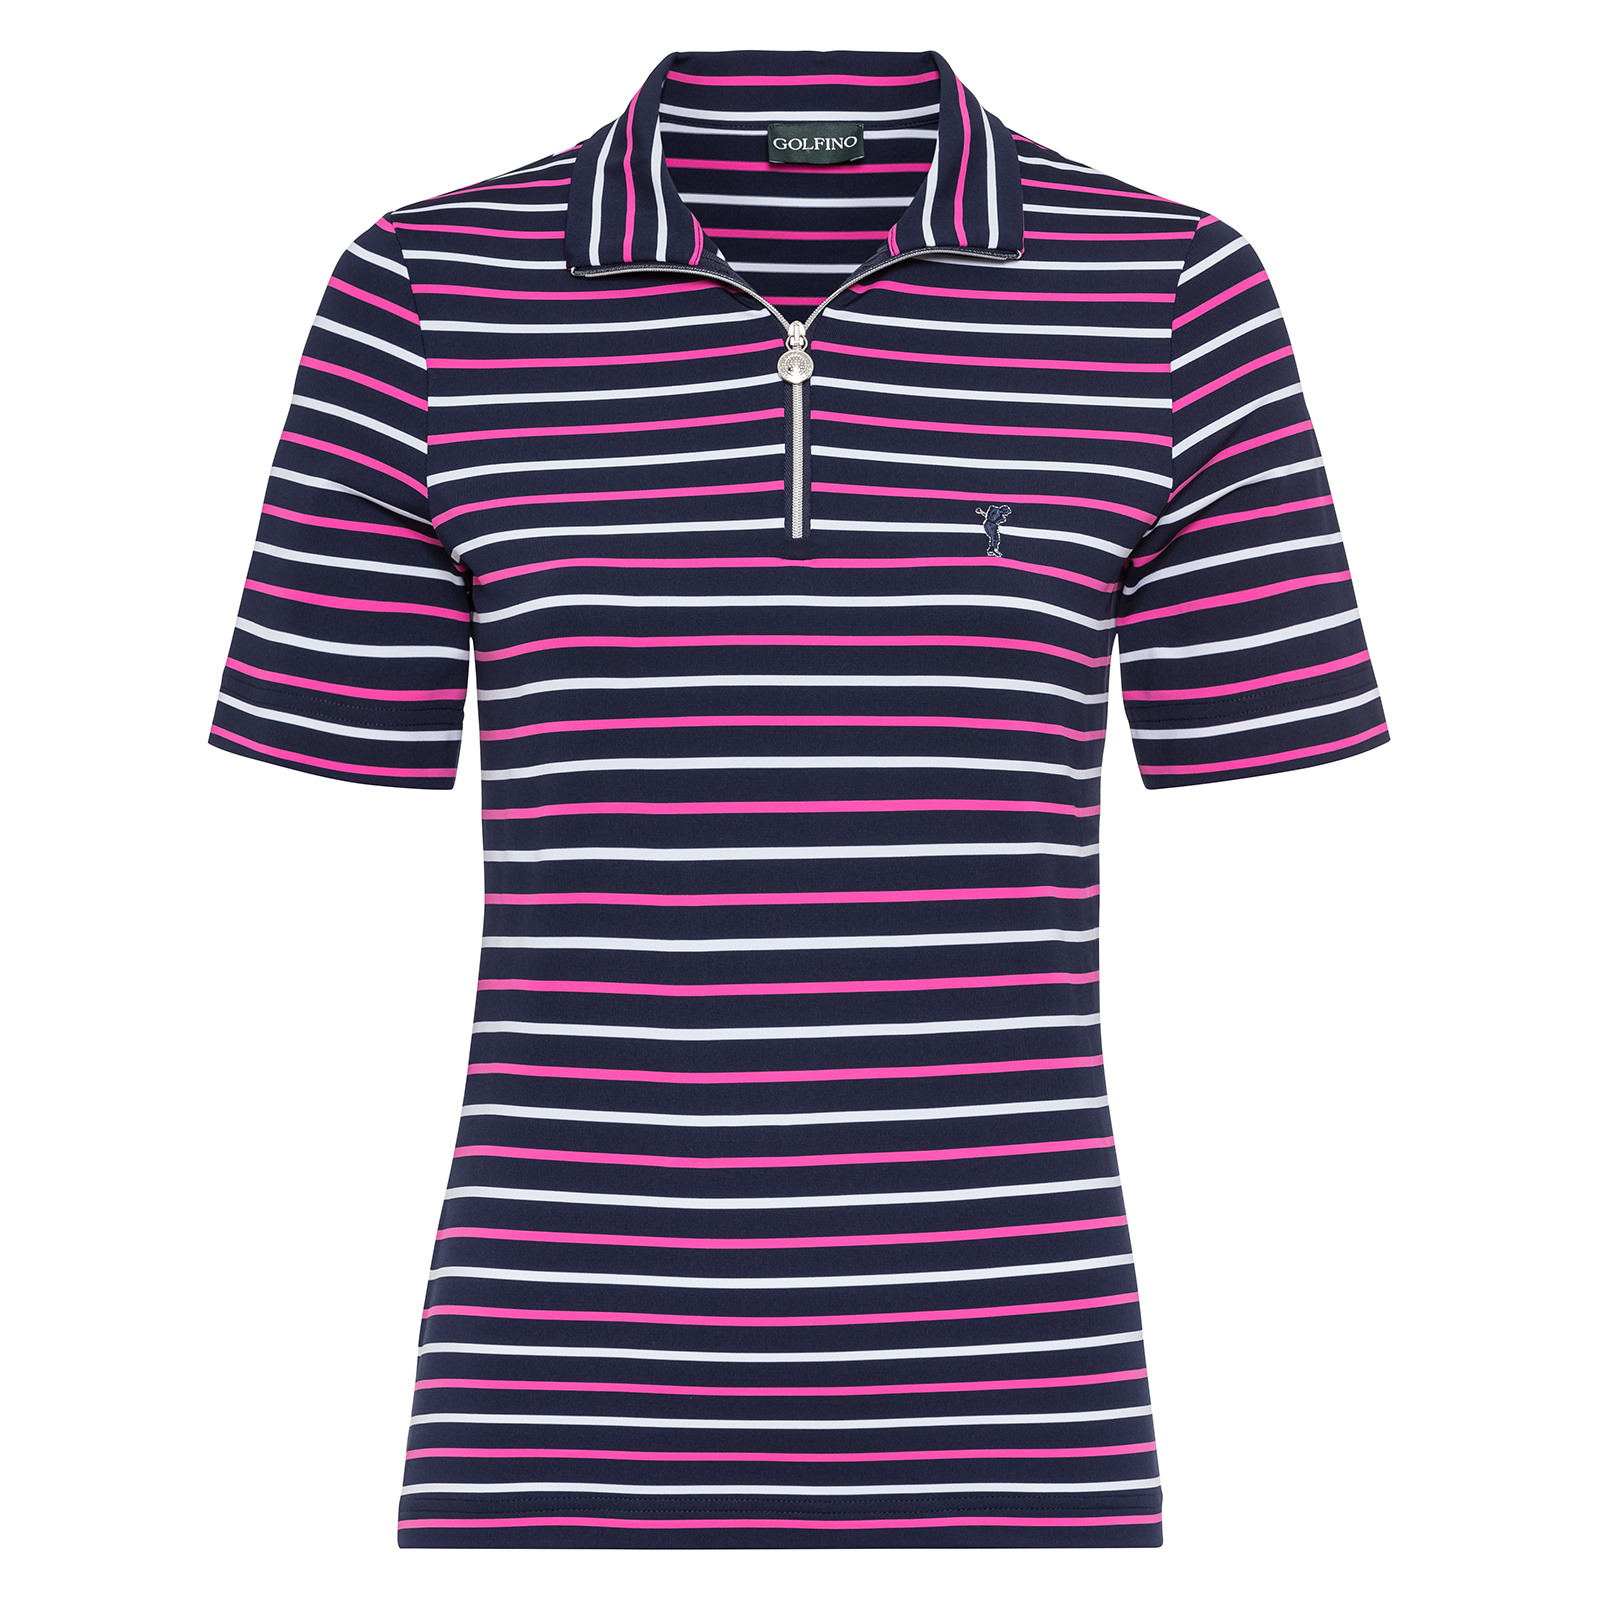 Golf polo shirt for active lady golfers 